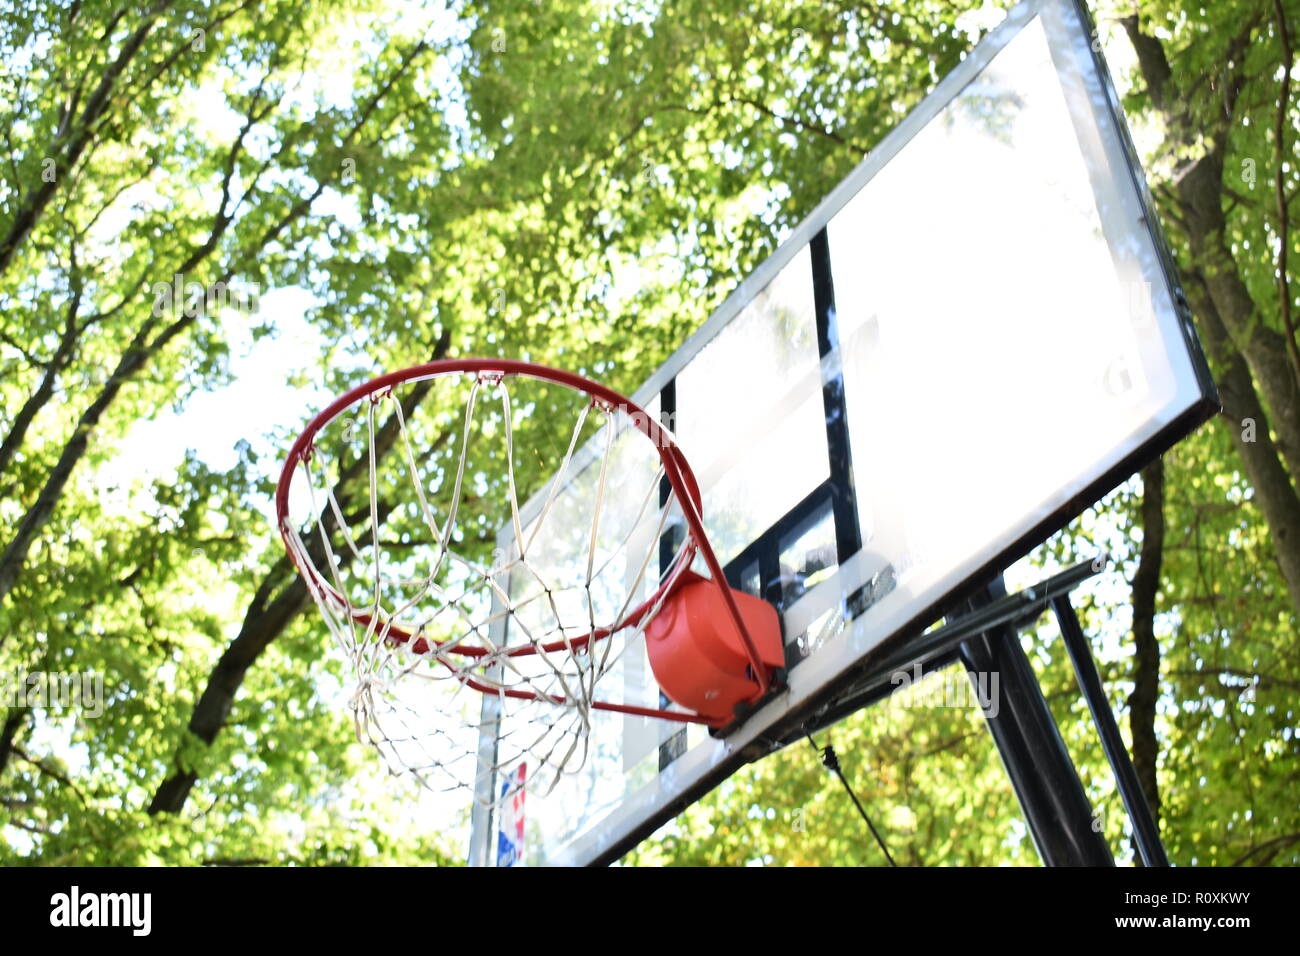 Upward shot of an outdoors basketball goal with trees in the background Stock Photo